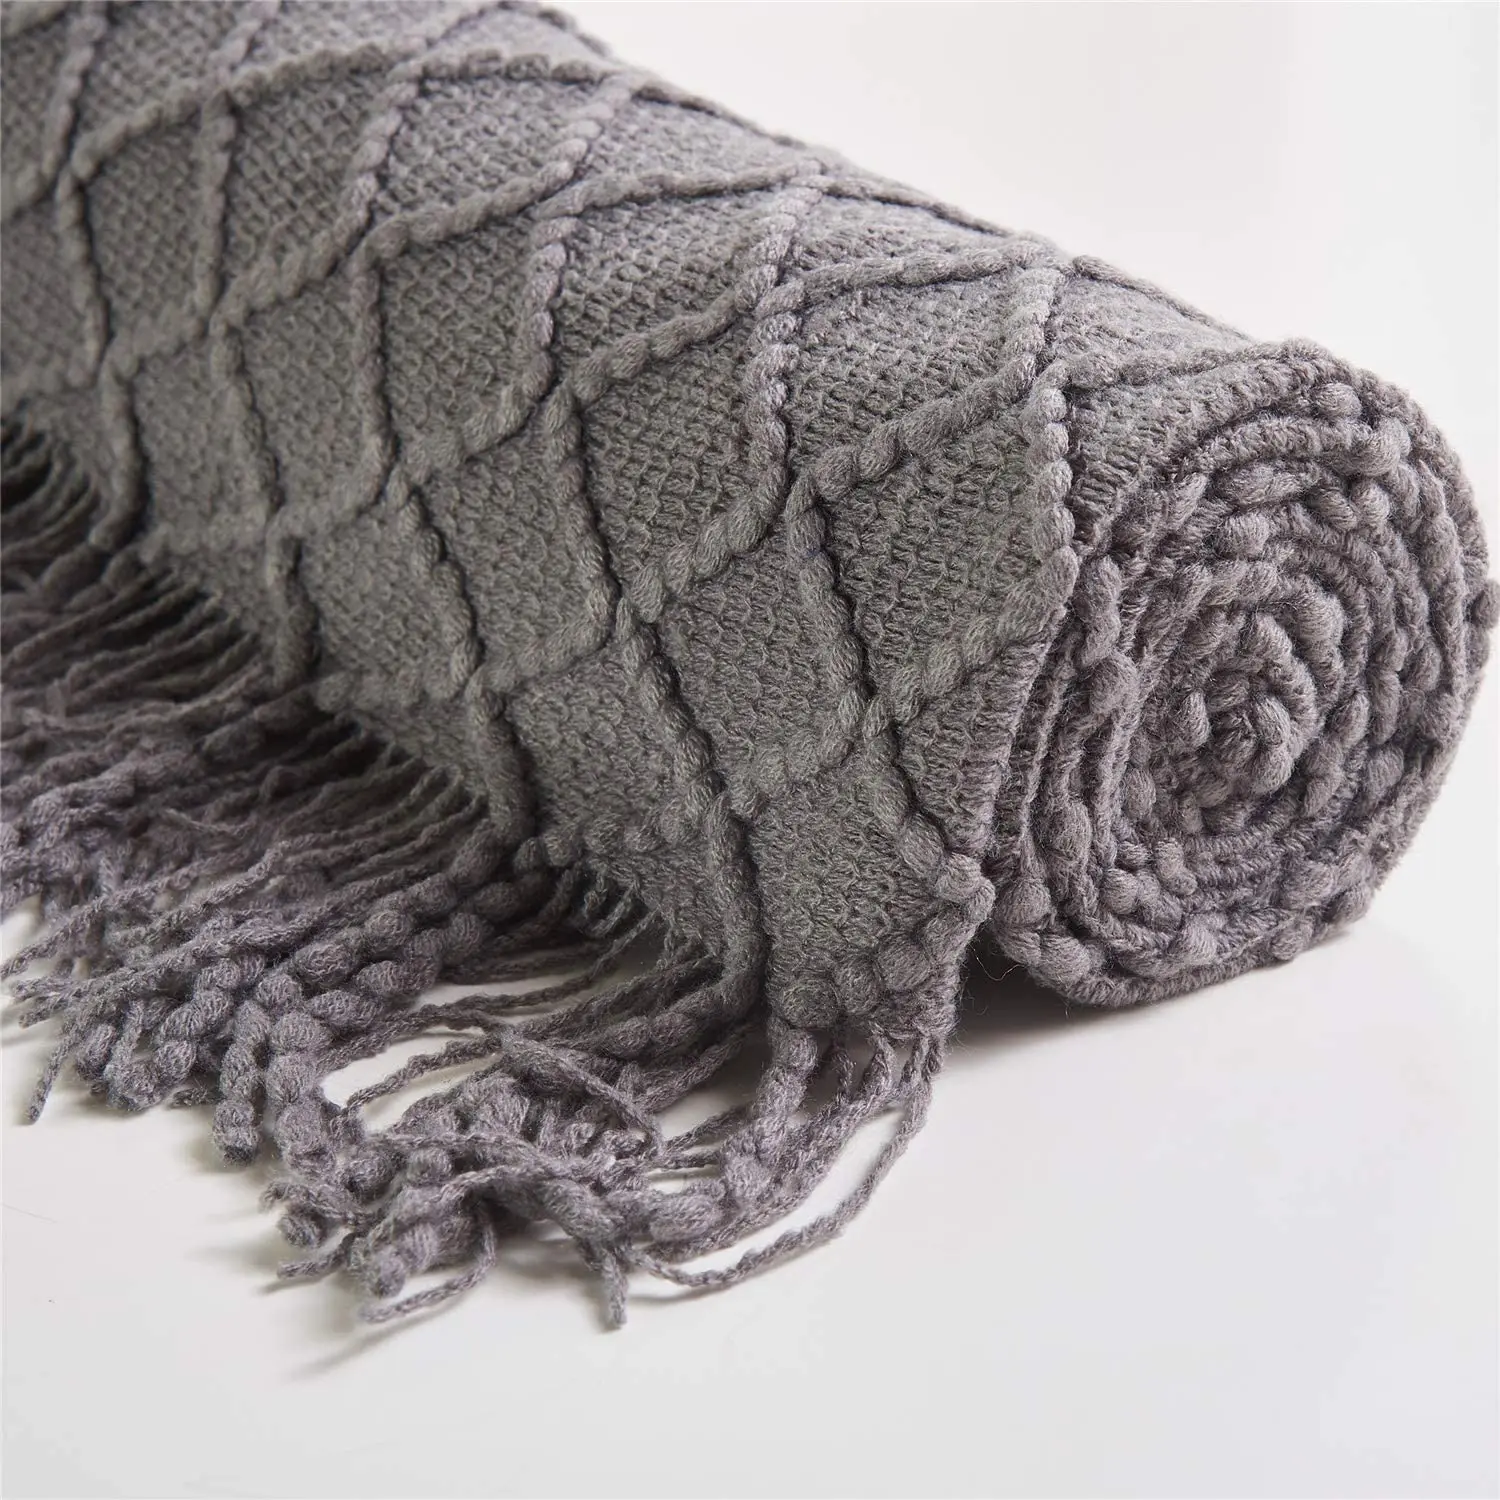 luxury throw Blanket Textured Solid Soft blanket for Sofa Couch Decorative Knitted Blanket for winter (1600141705712)